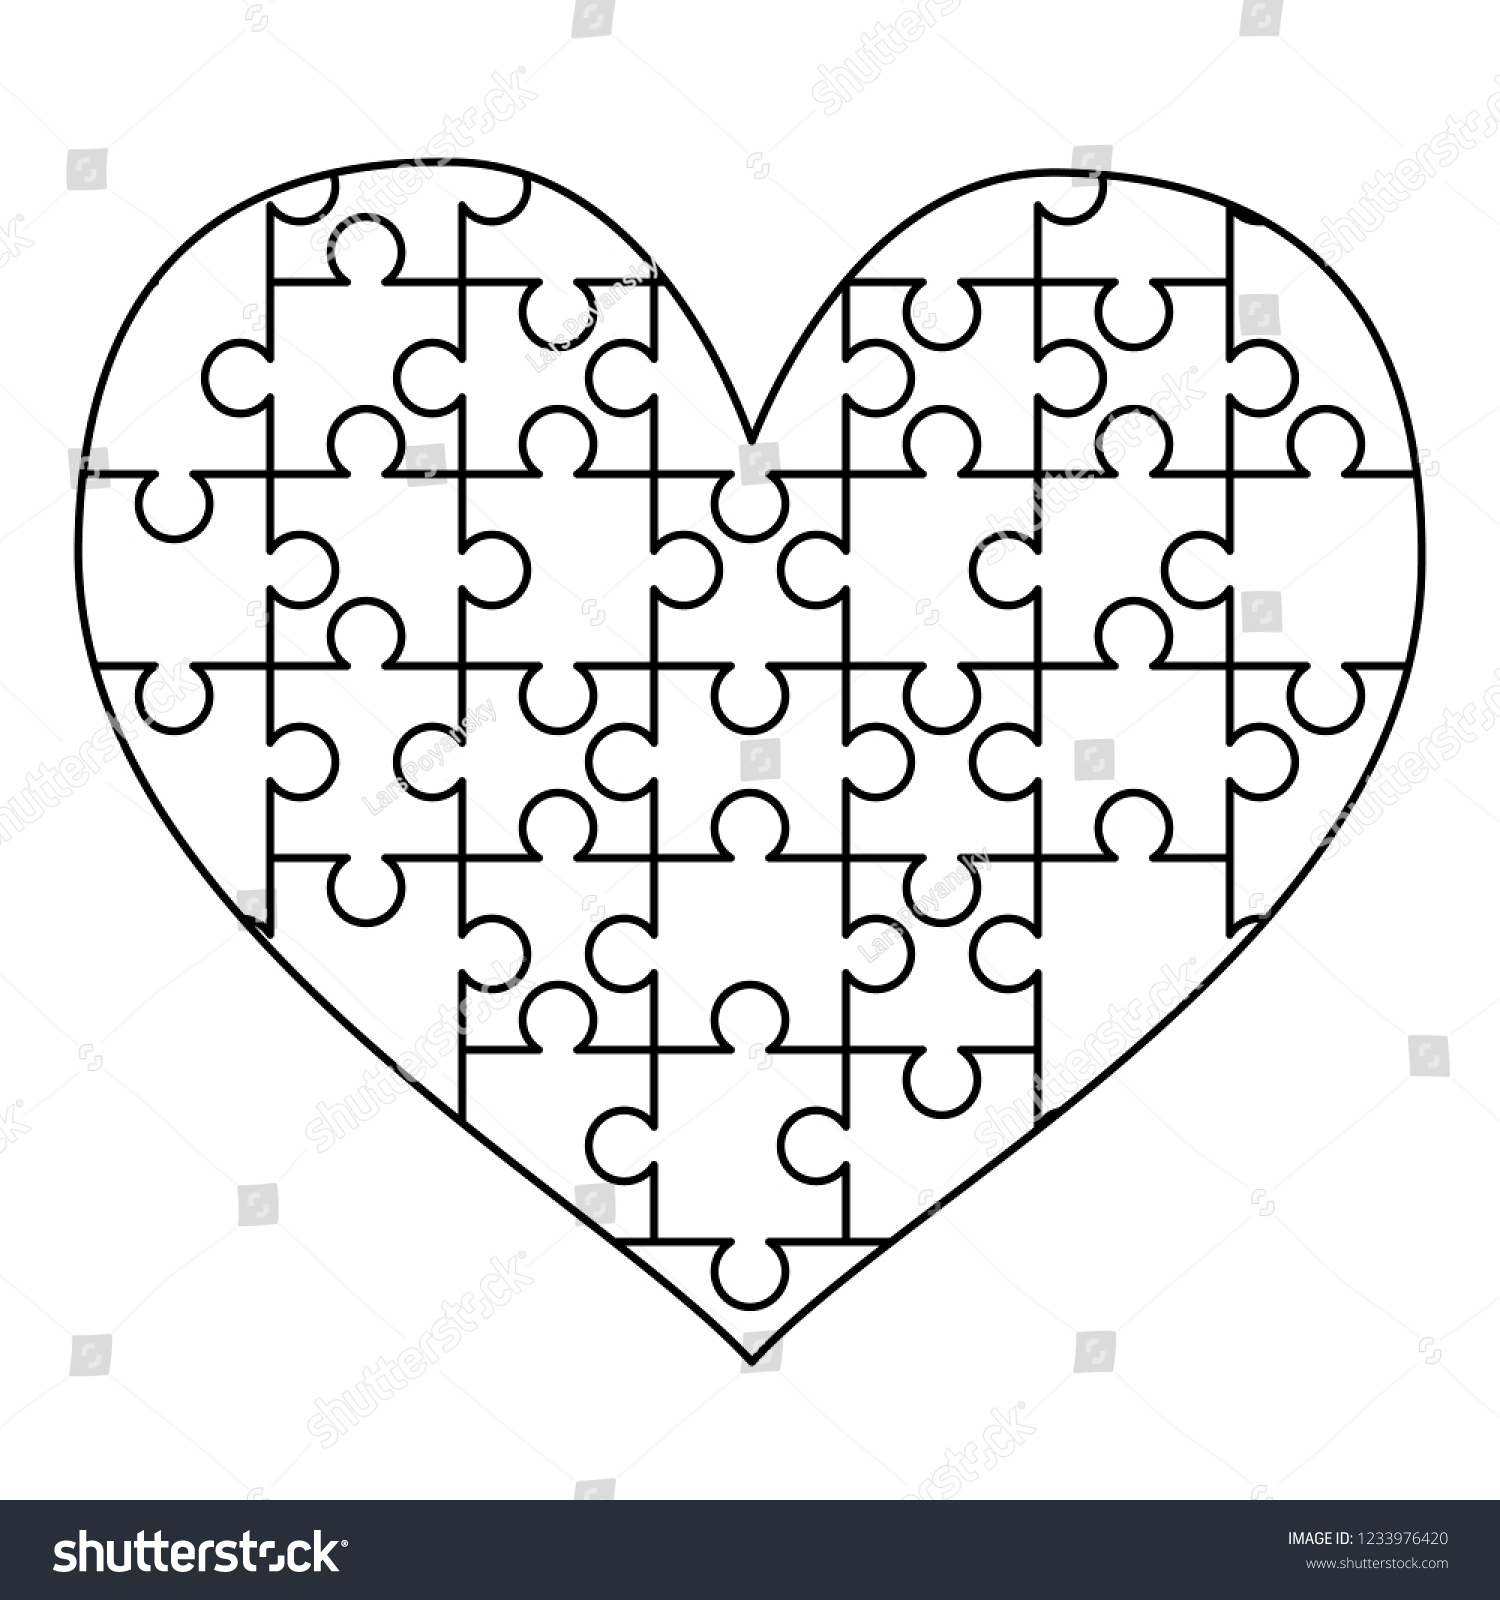 Royalty Free Stock Illustration Of White Puzzles Pieces Arranged - Printable Puzzle Heart